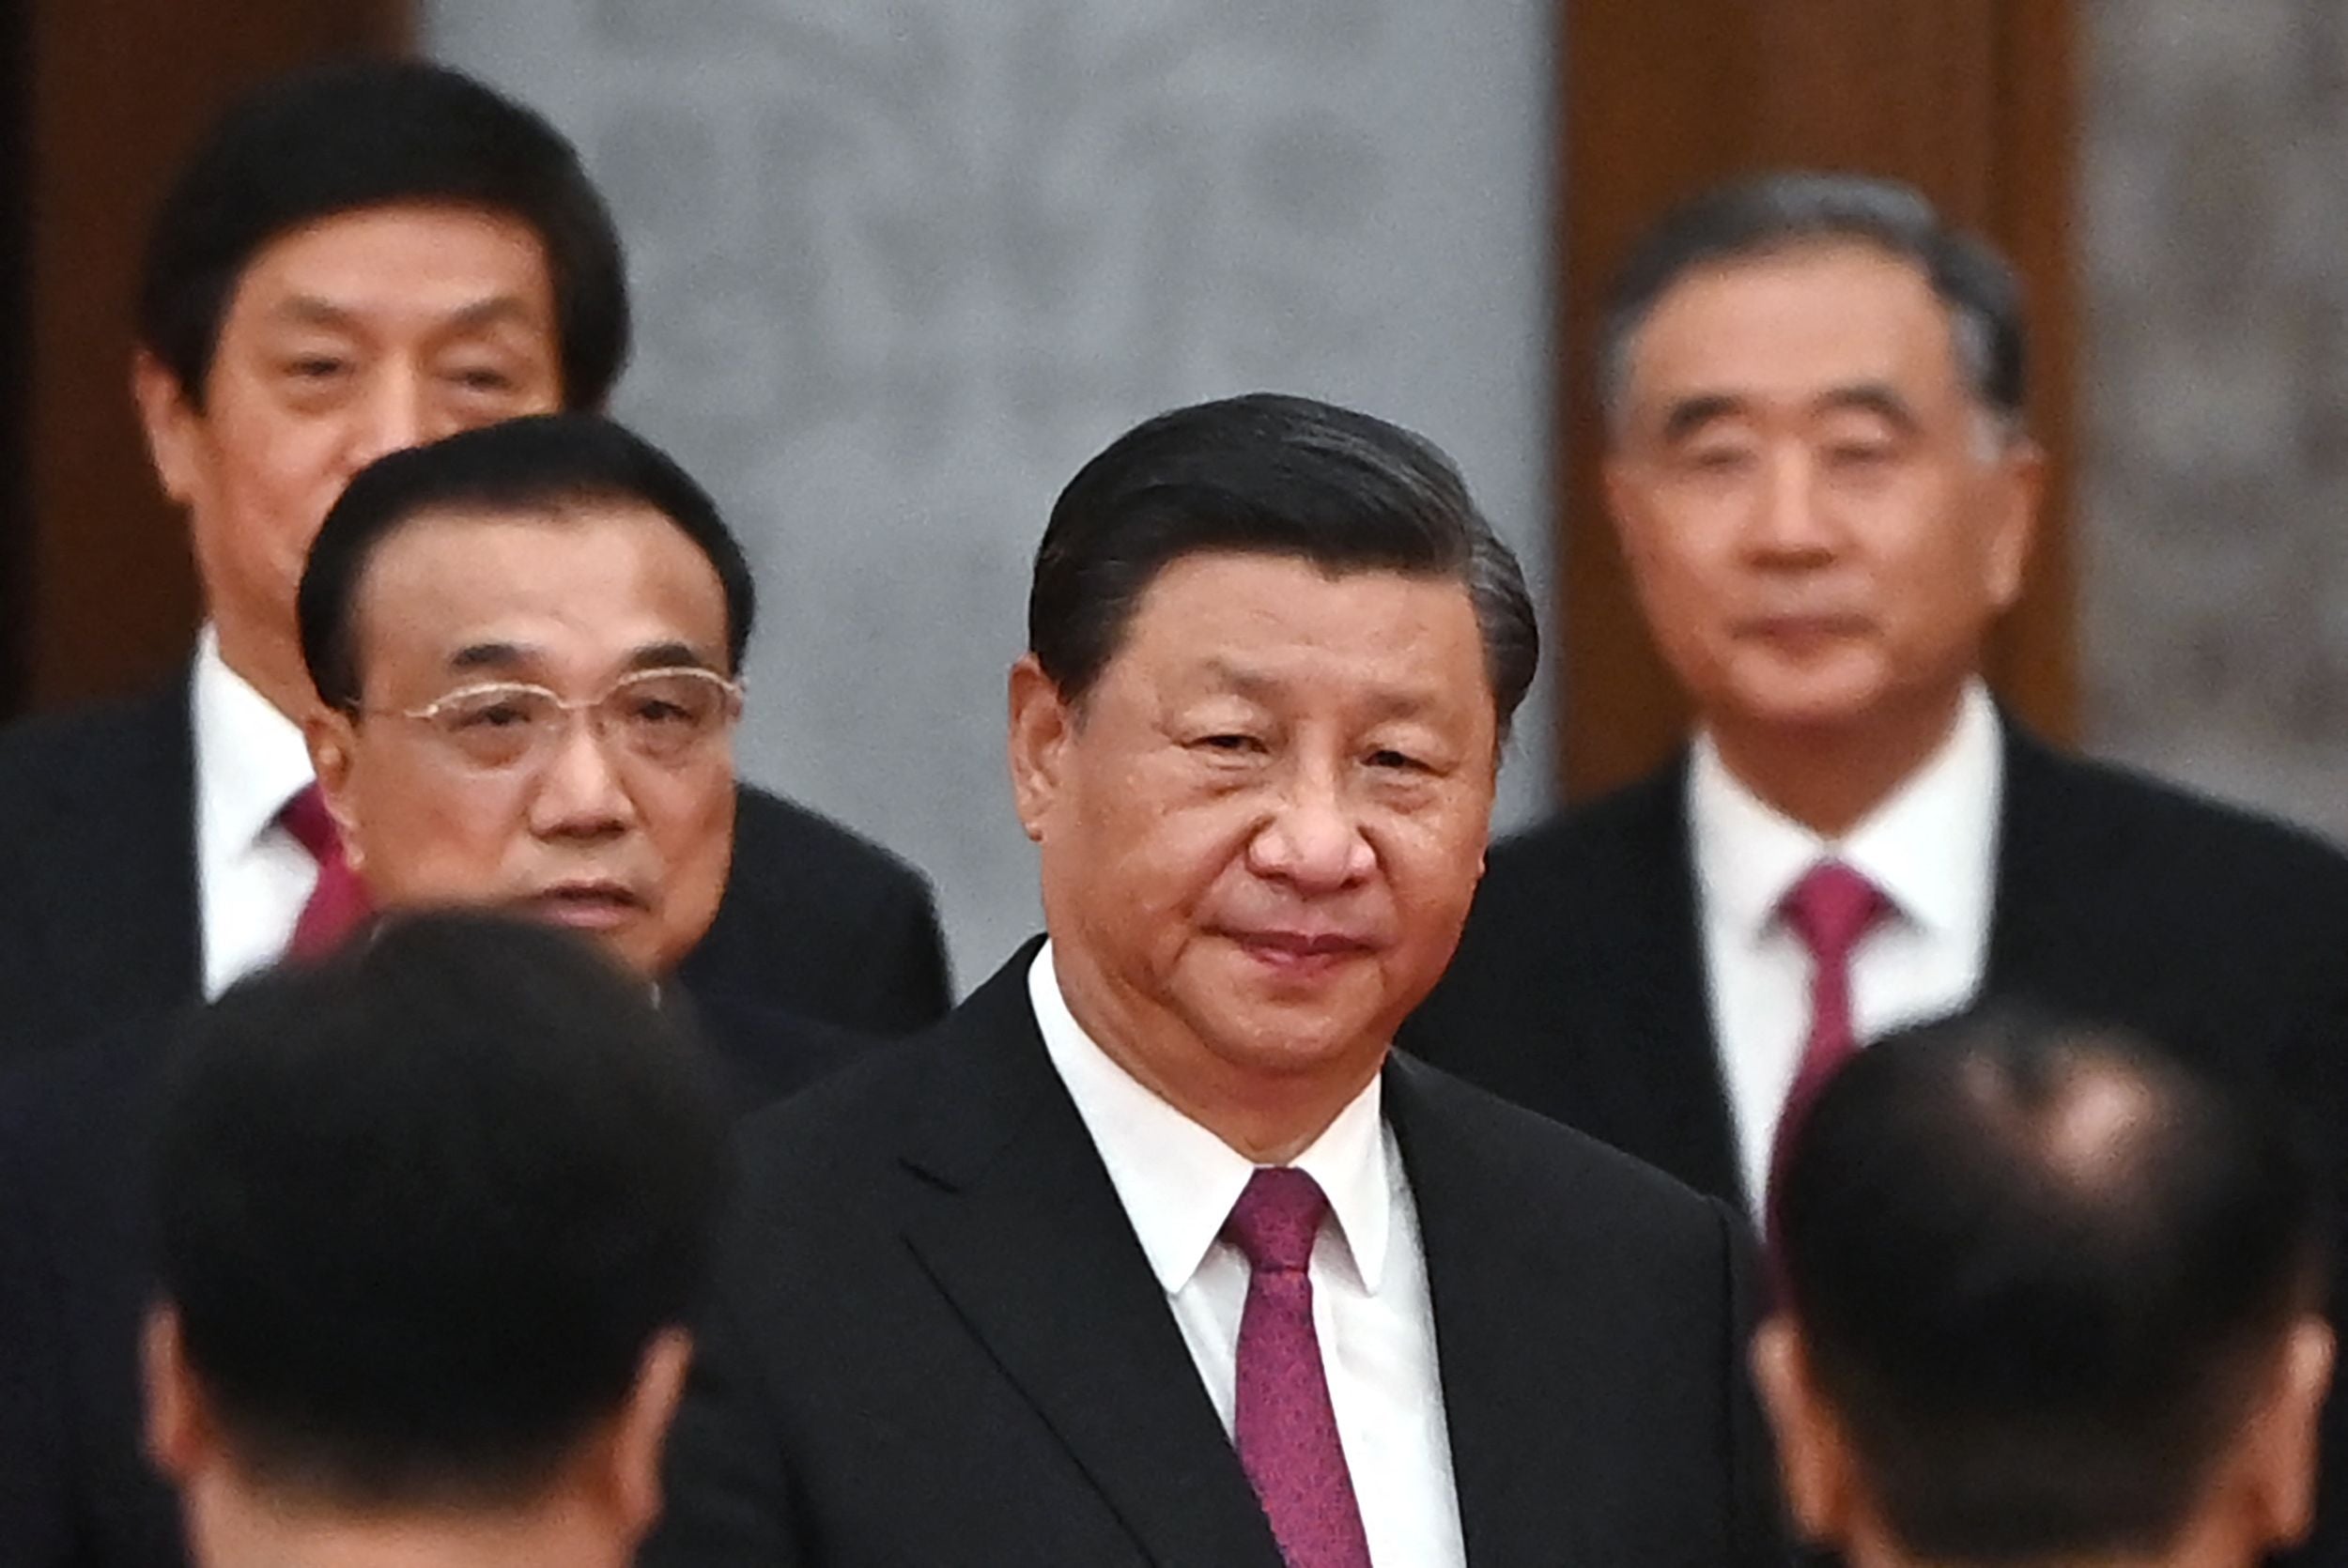 Chinese President Xi Jinping is leading the military’s modernisation strategy